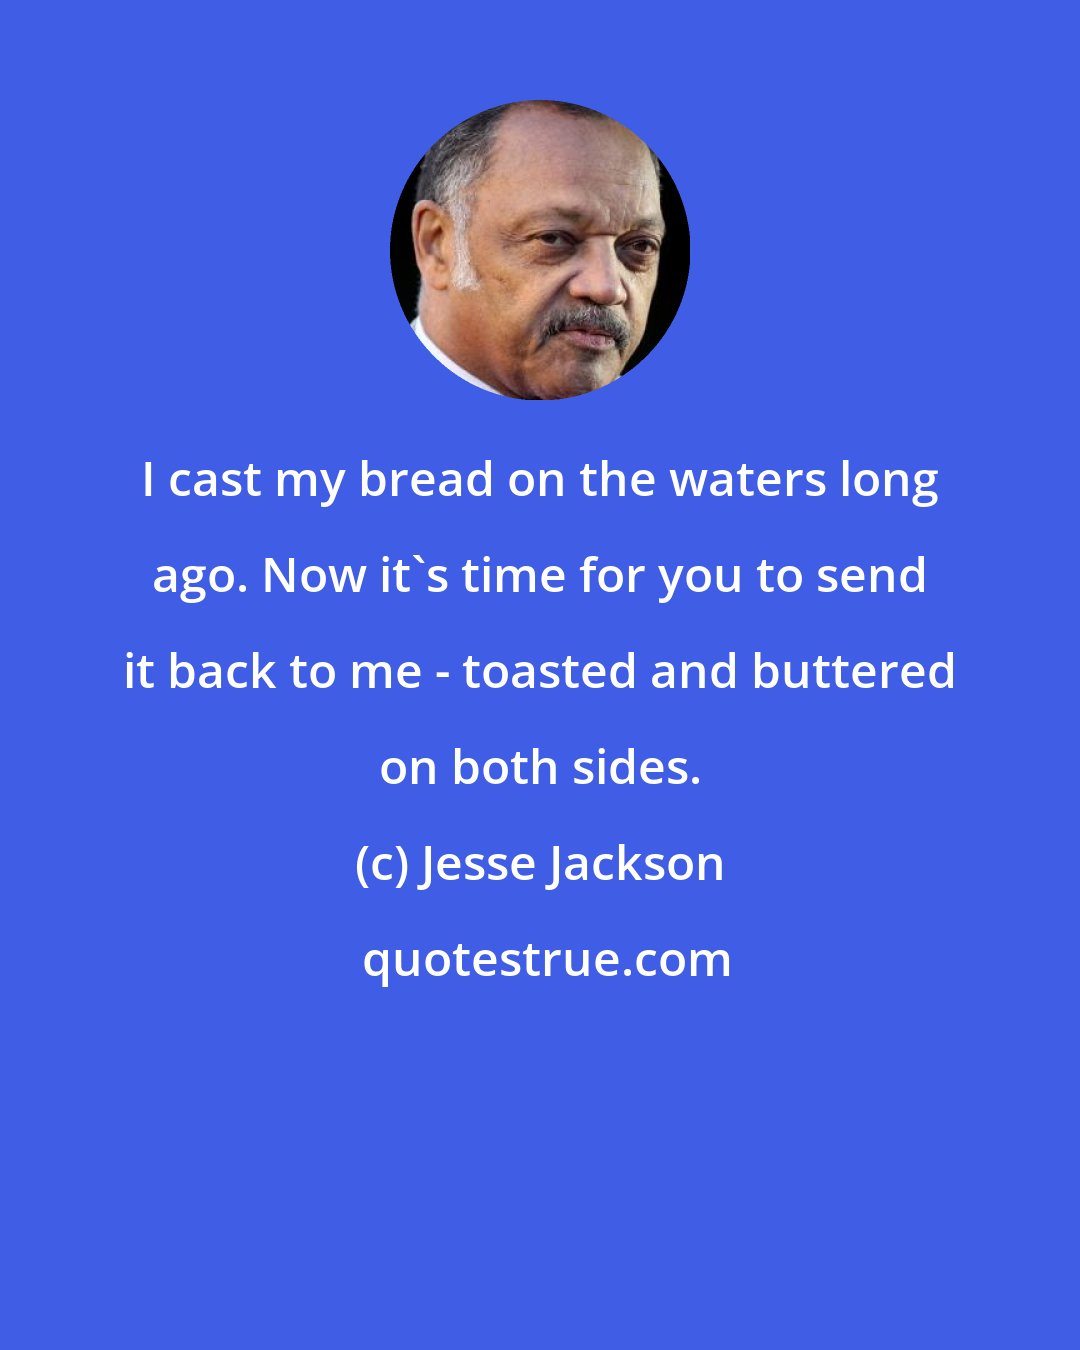 Jesse Jackson: I cast my bread on the waters long ago. Now it's time for you to send it back to me - toasted and buttered on both sides.